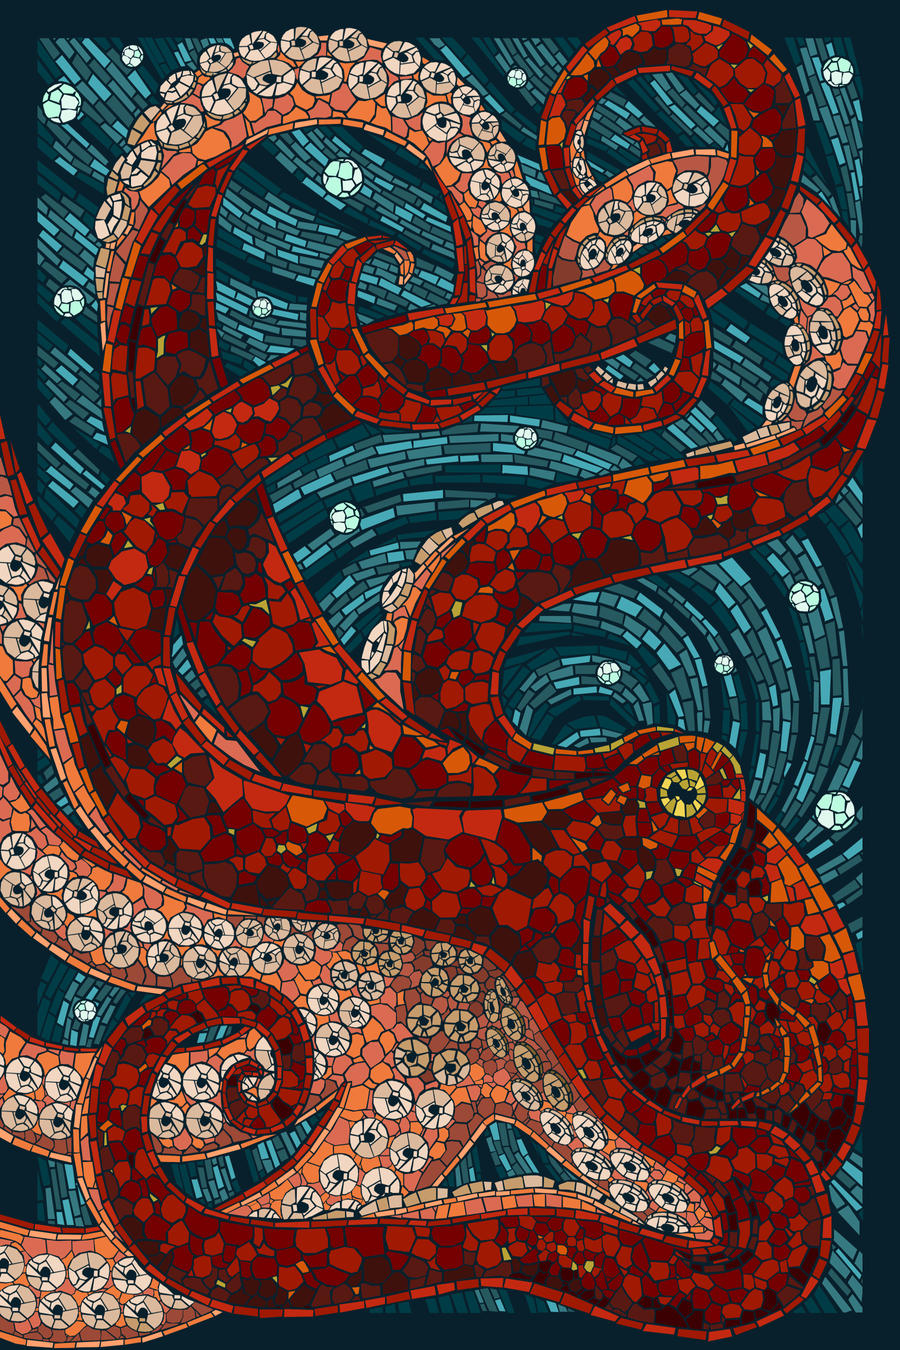 paper_mosaic_octopus_by_chronoperates-d4i27ze.jpg